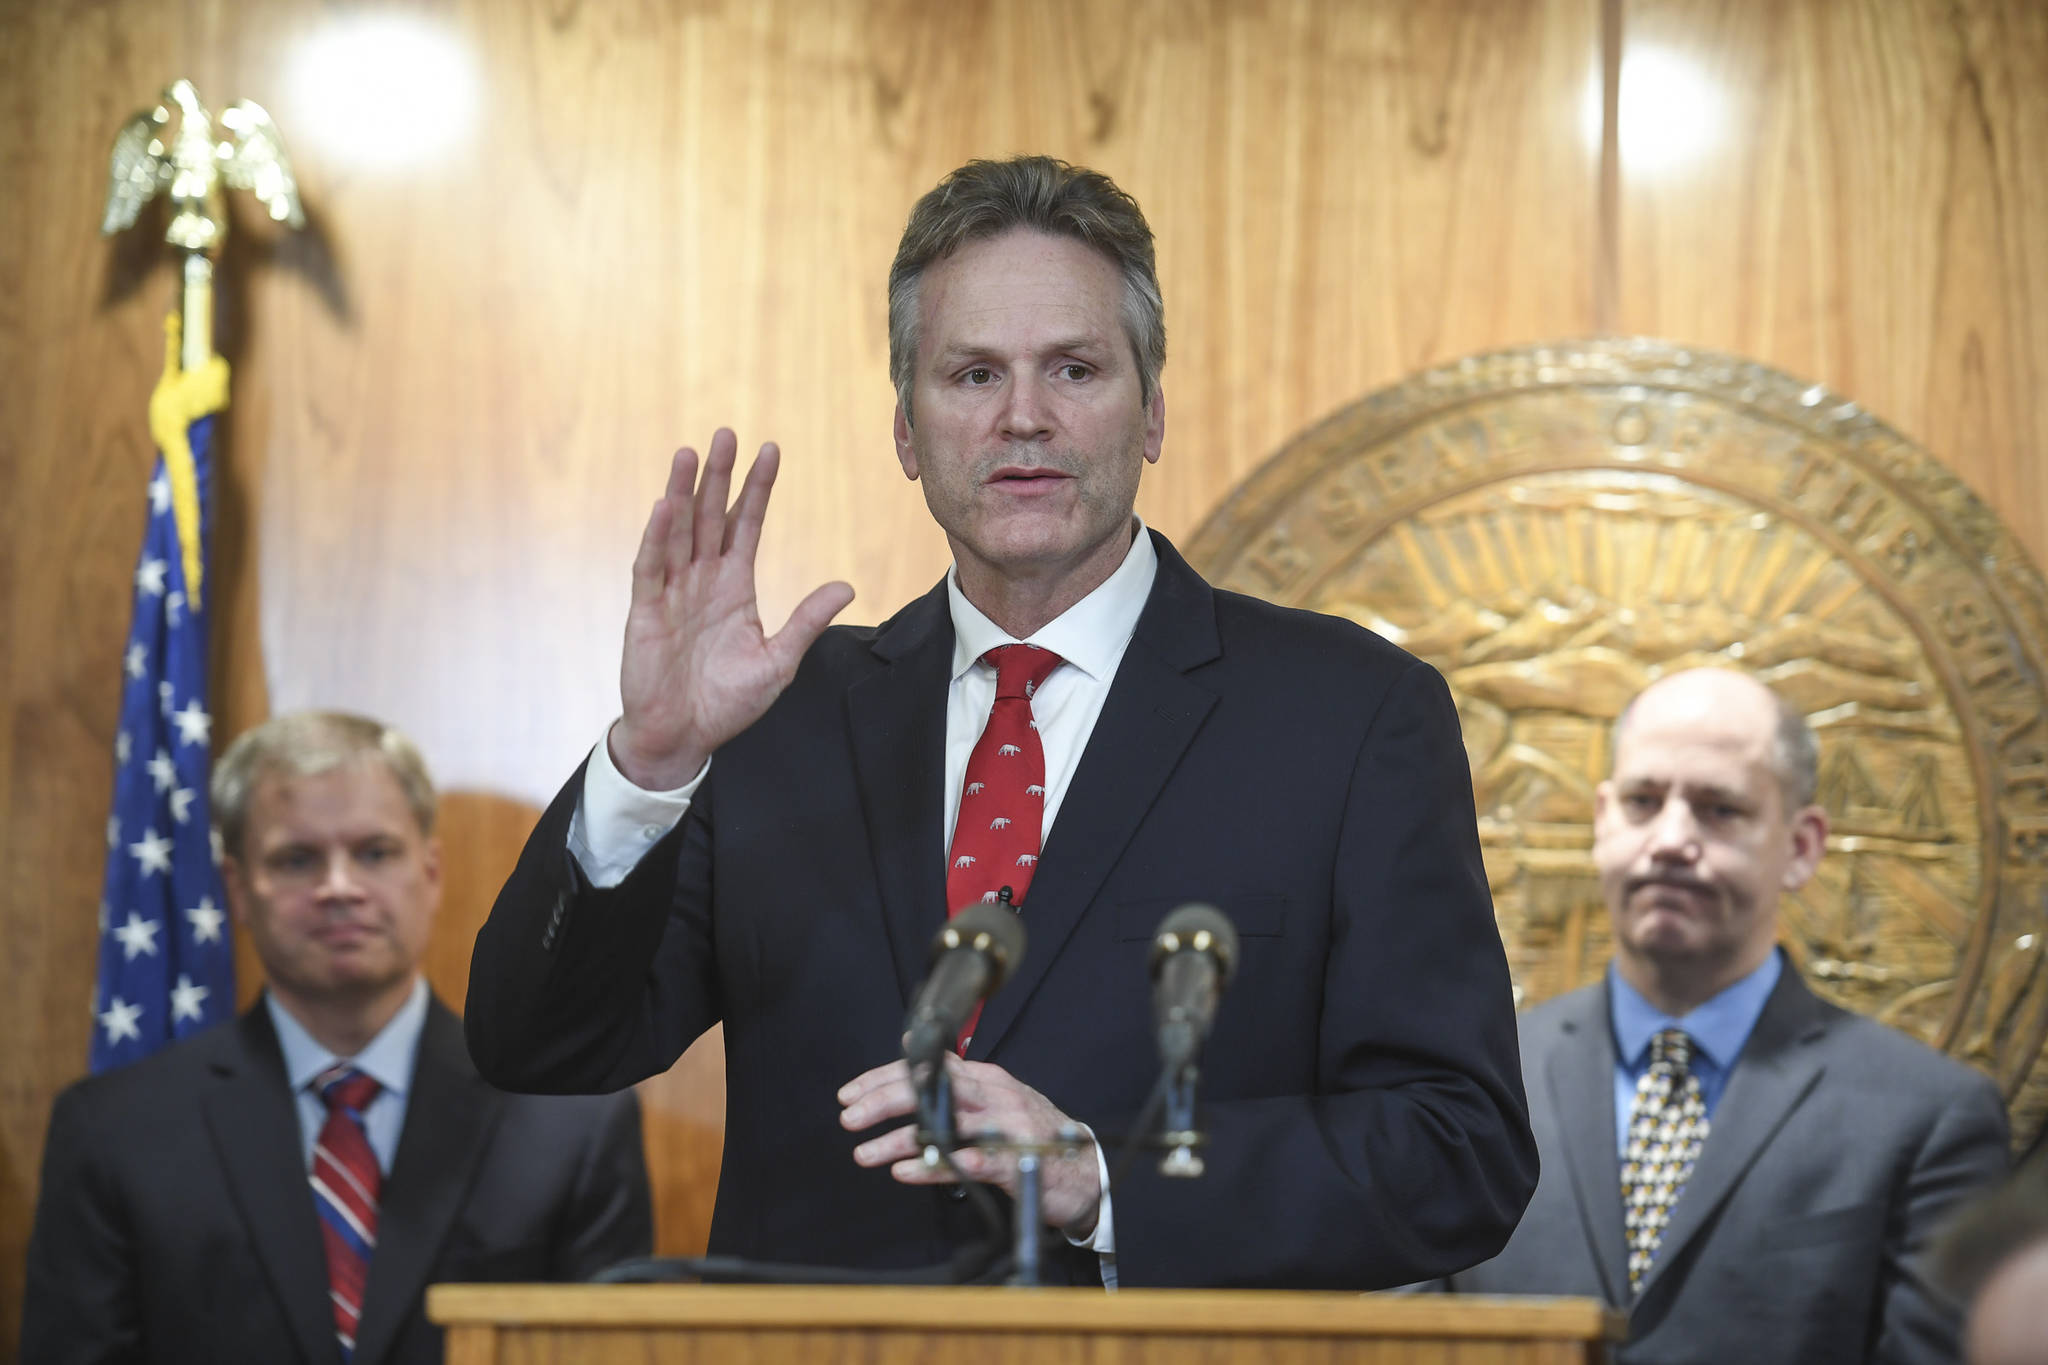 Draining state savings? Lawmakers, economists criticize governor’s budget